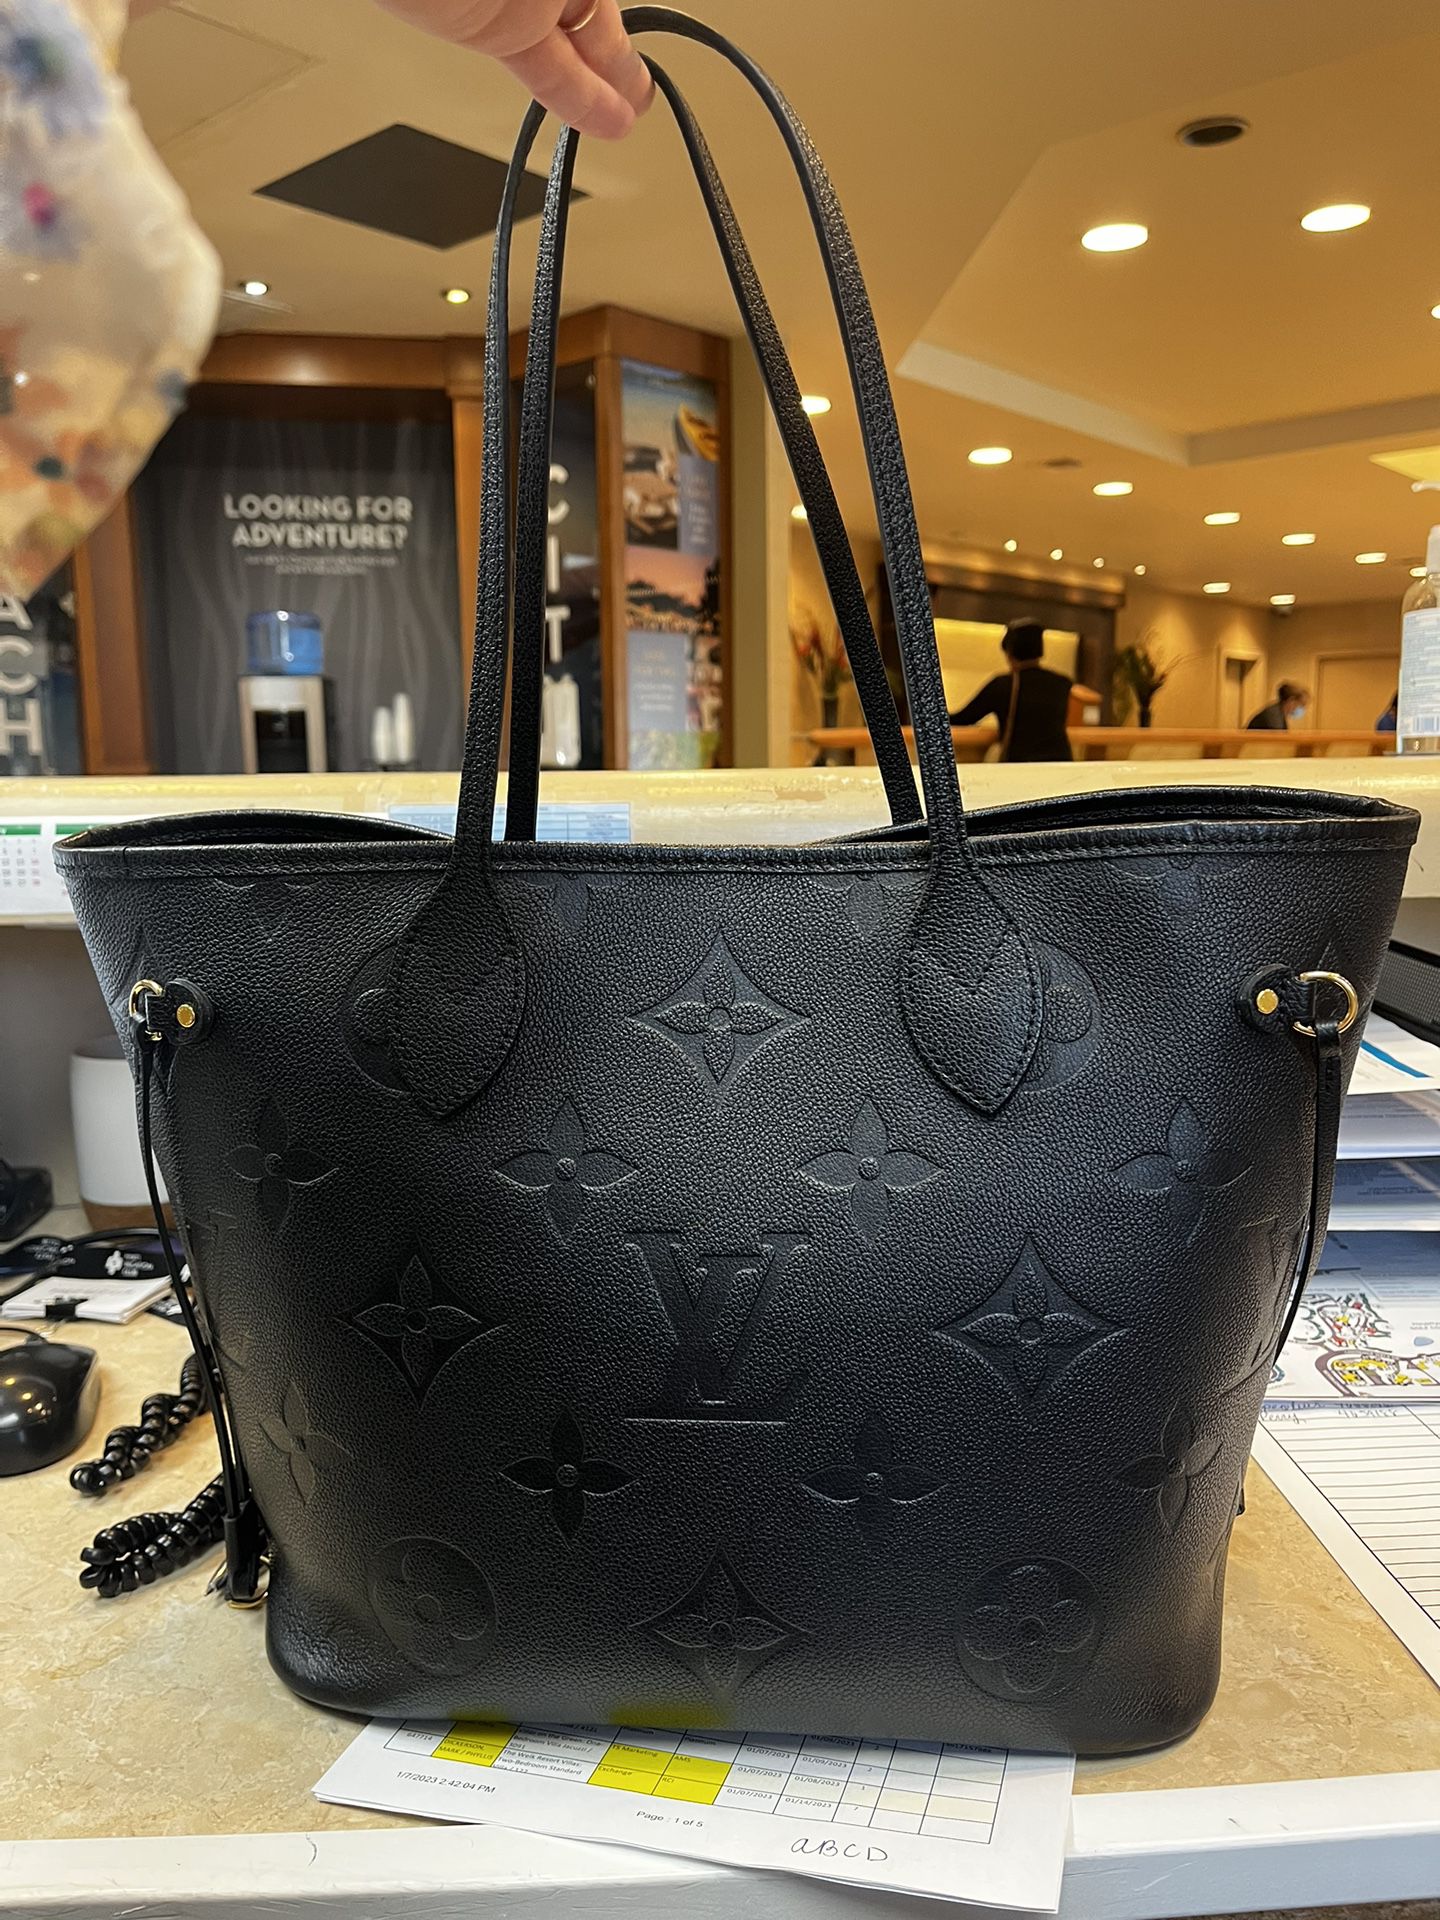 I bought the new Neverfull MM in Empreinte Leather in the color